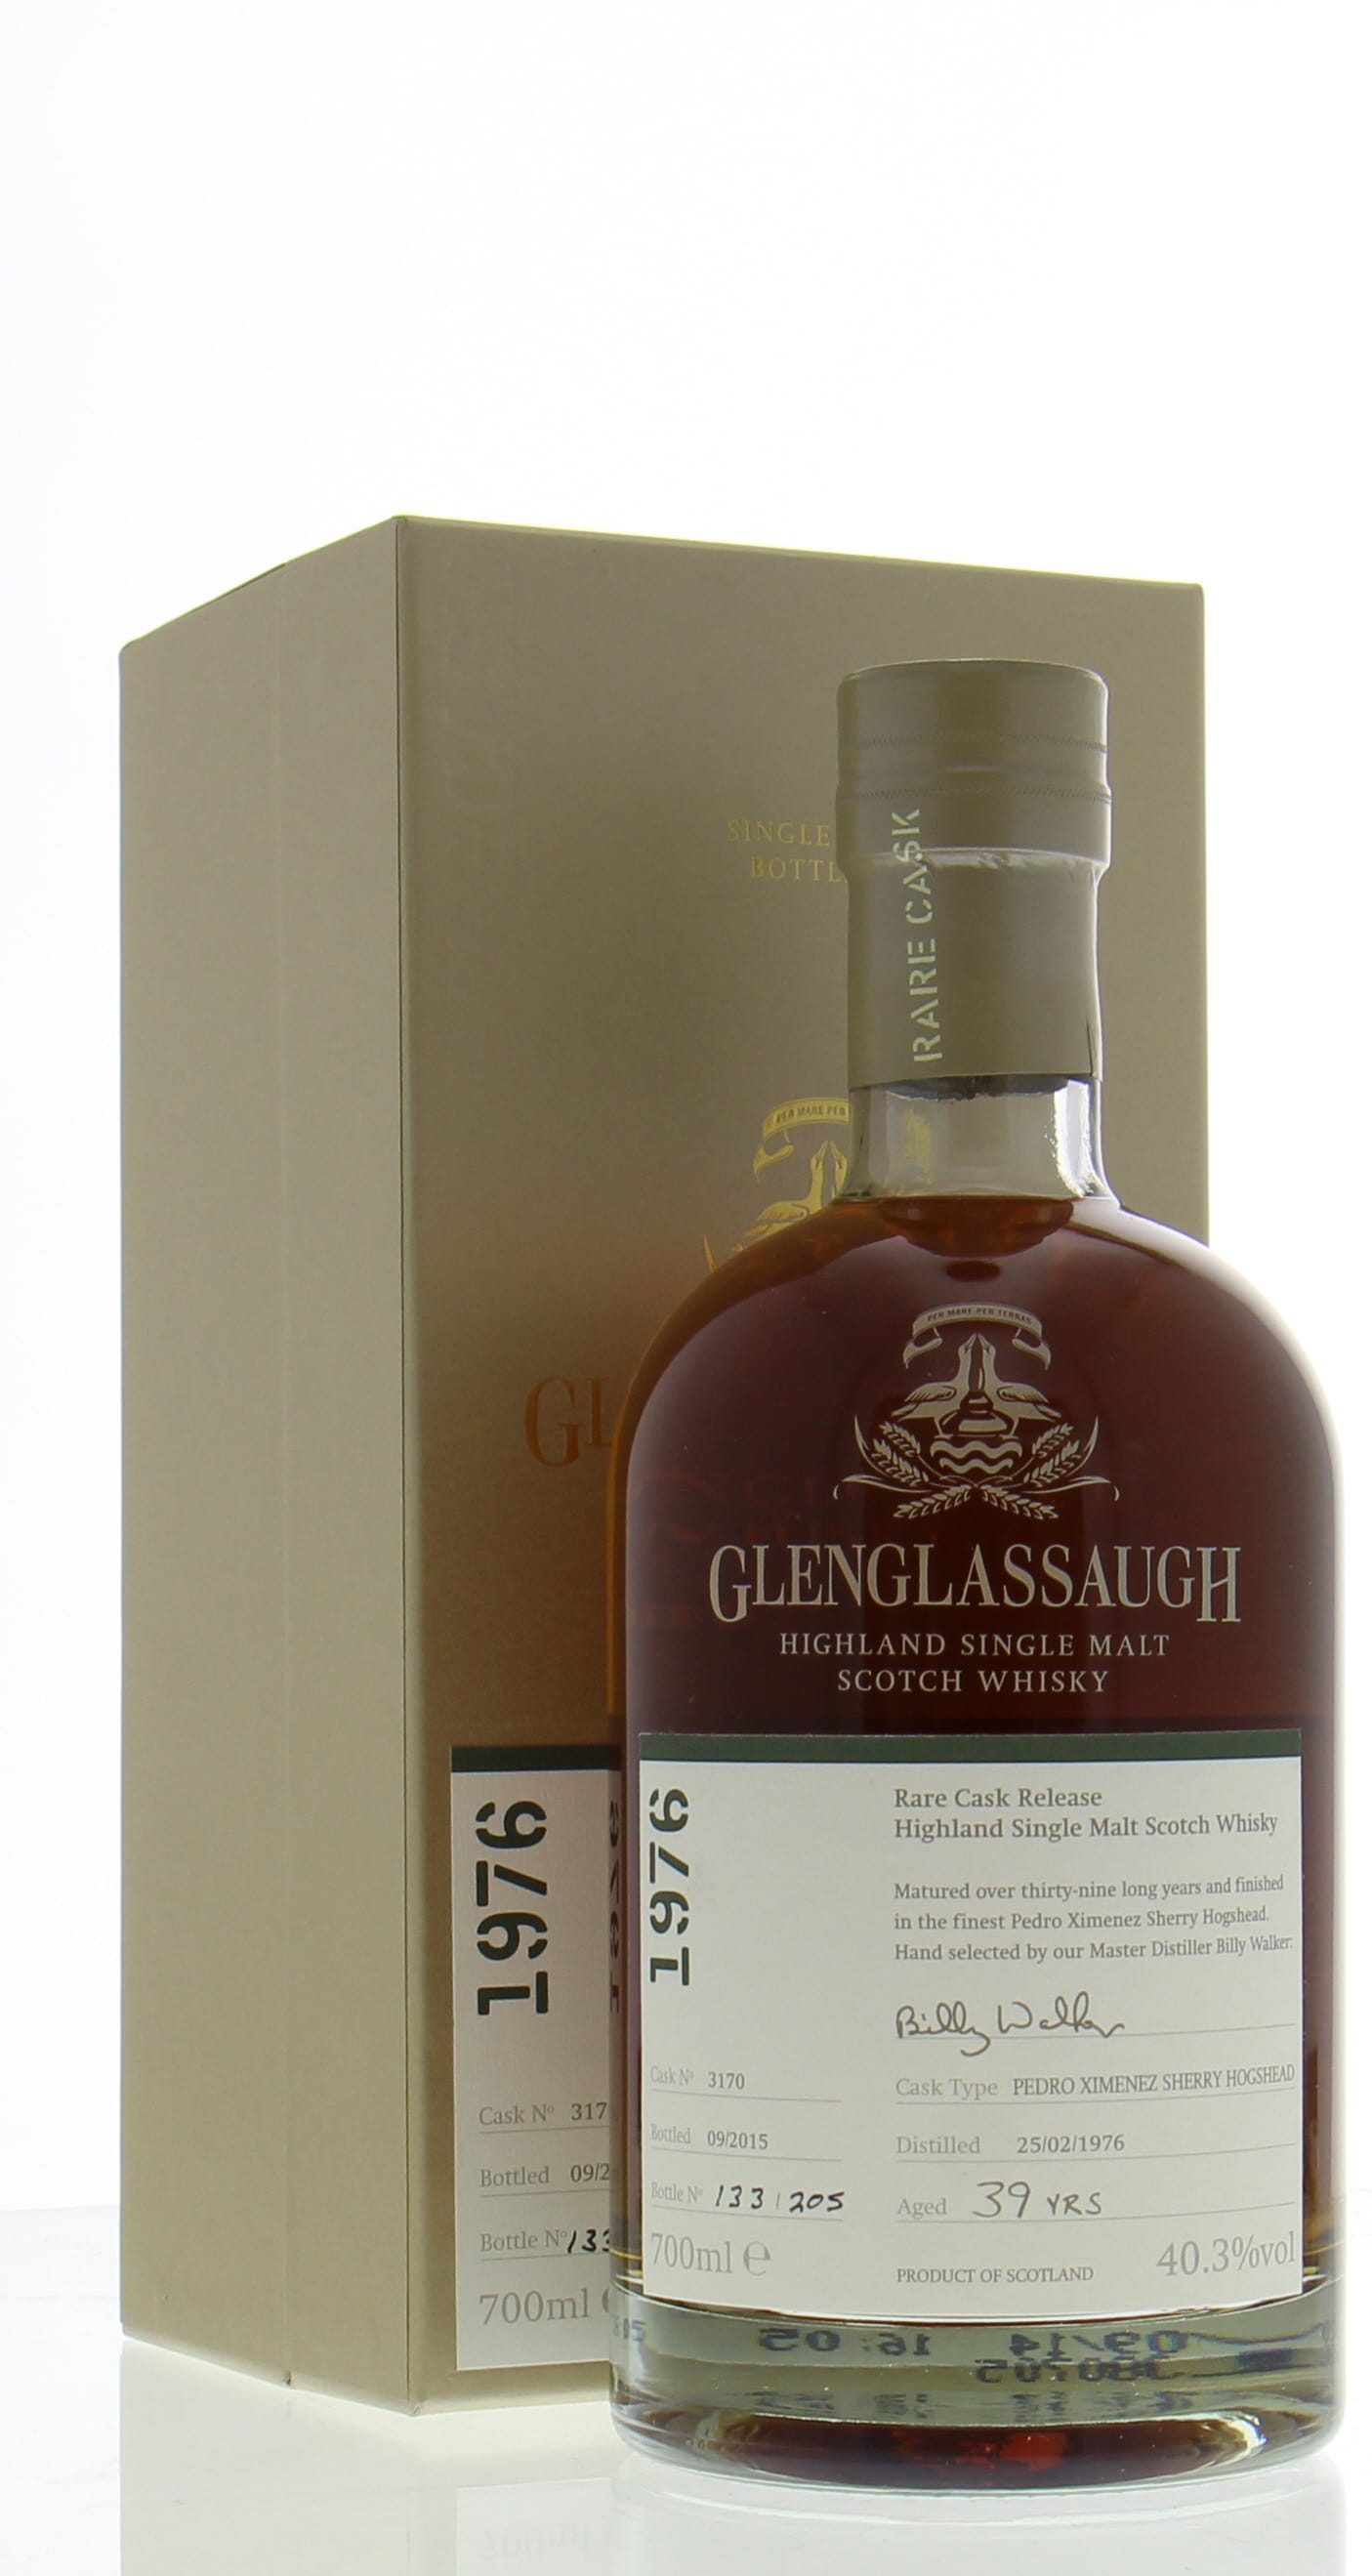 Glenglassaugh - 39 Years Old Rare Cask Release Batch 2 Cask:3170 40.3% 1976 In Original Container